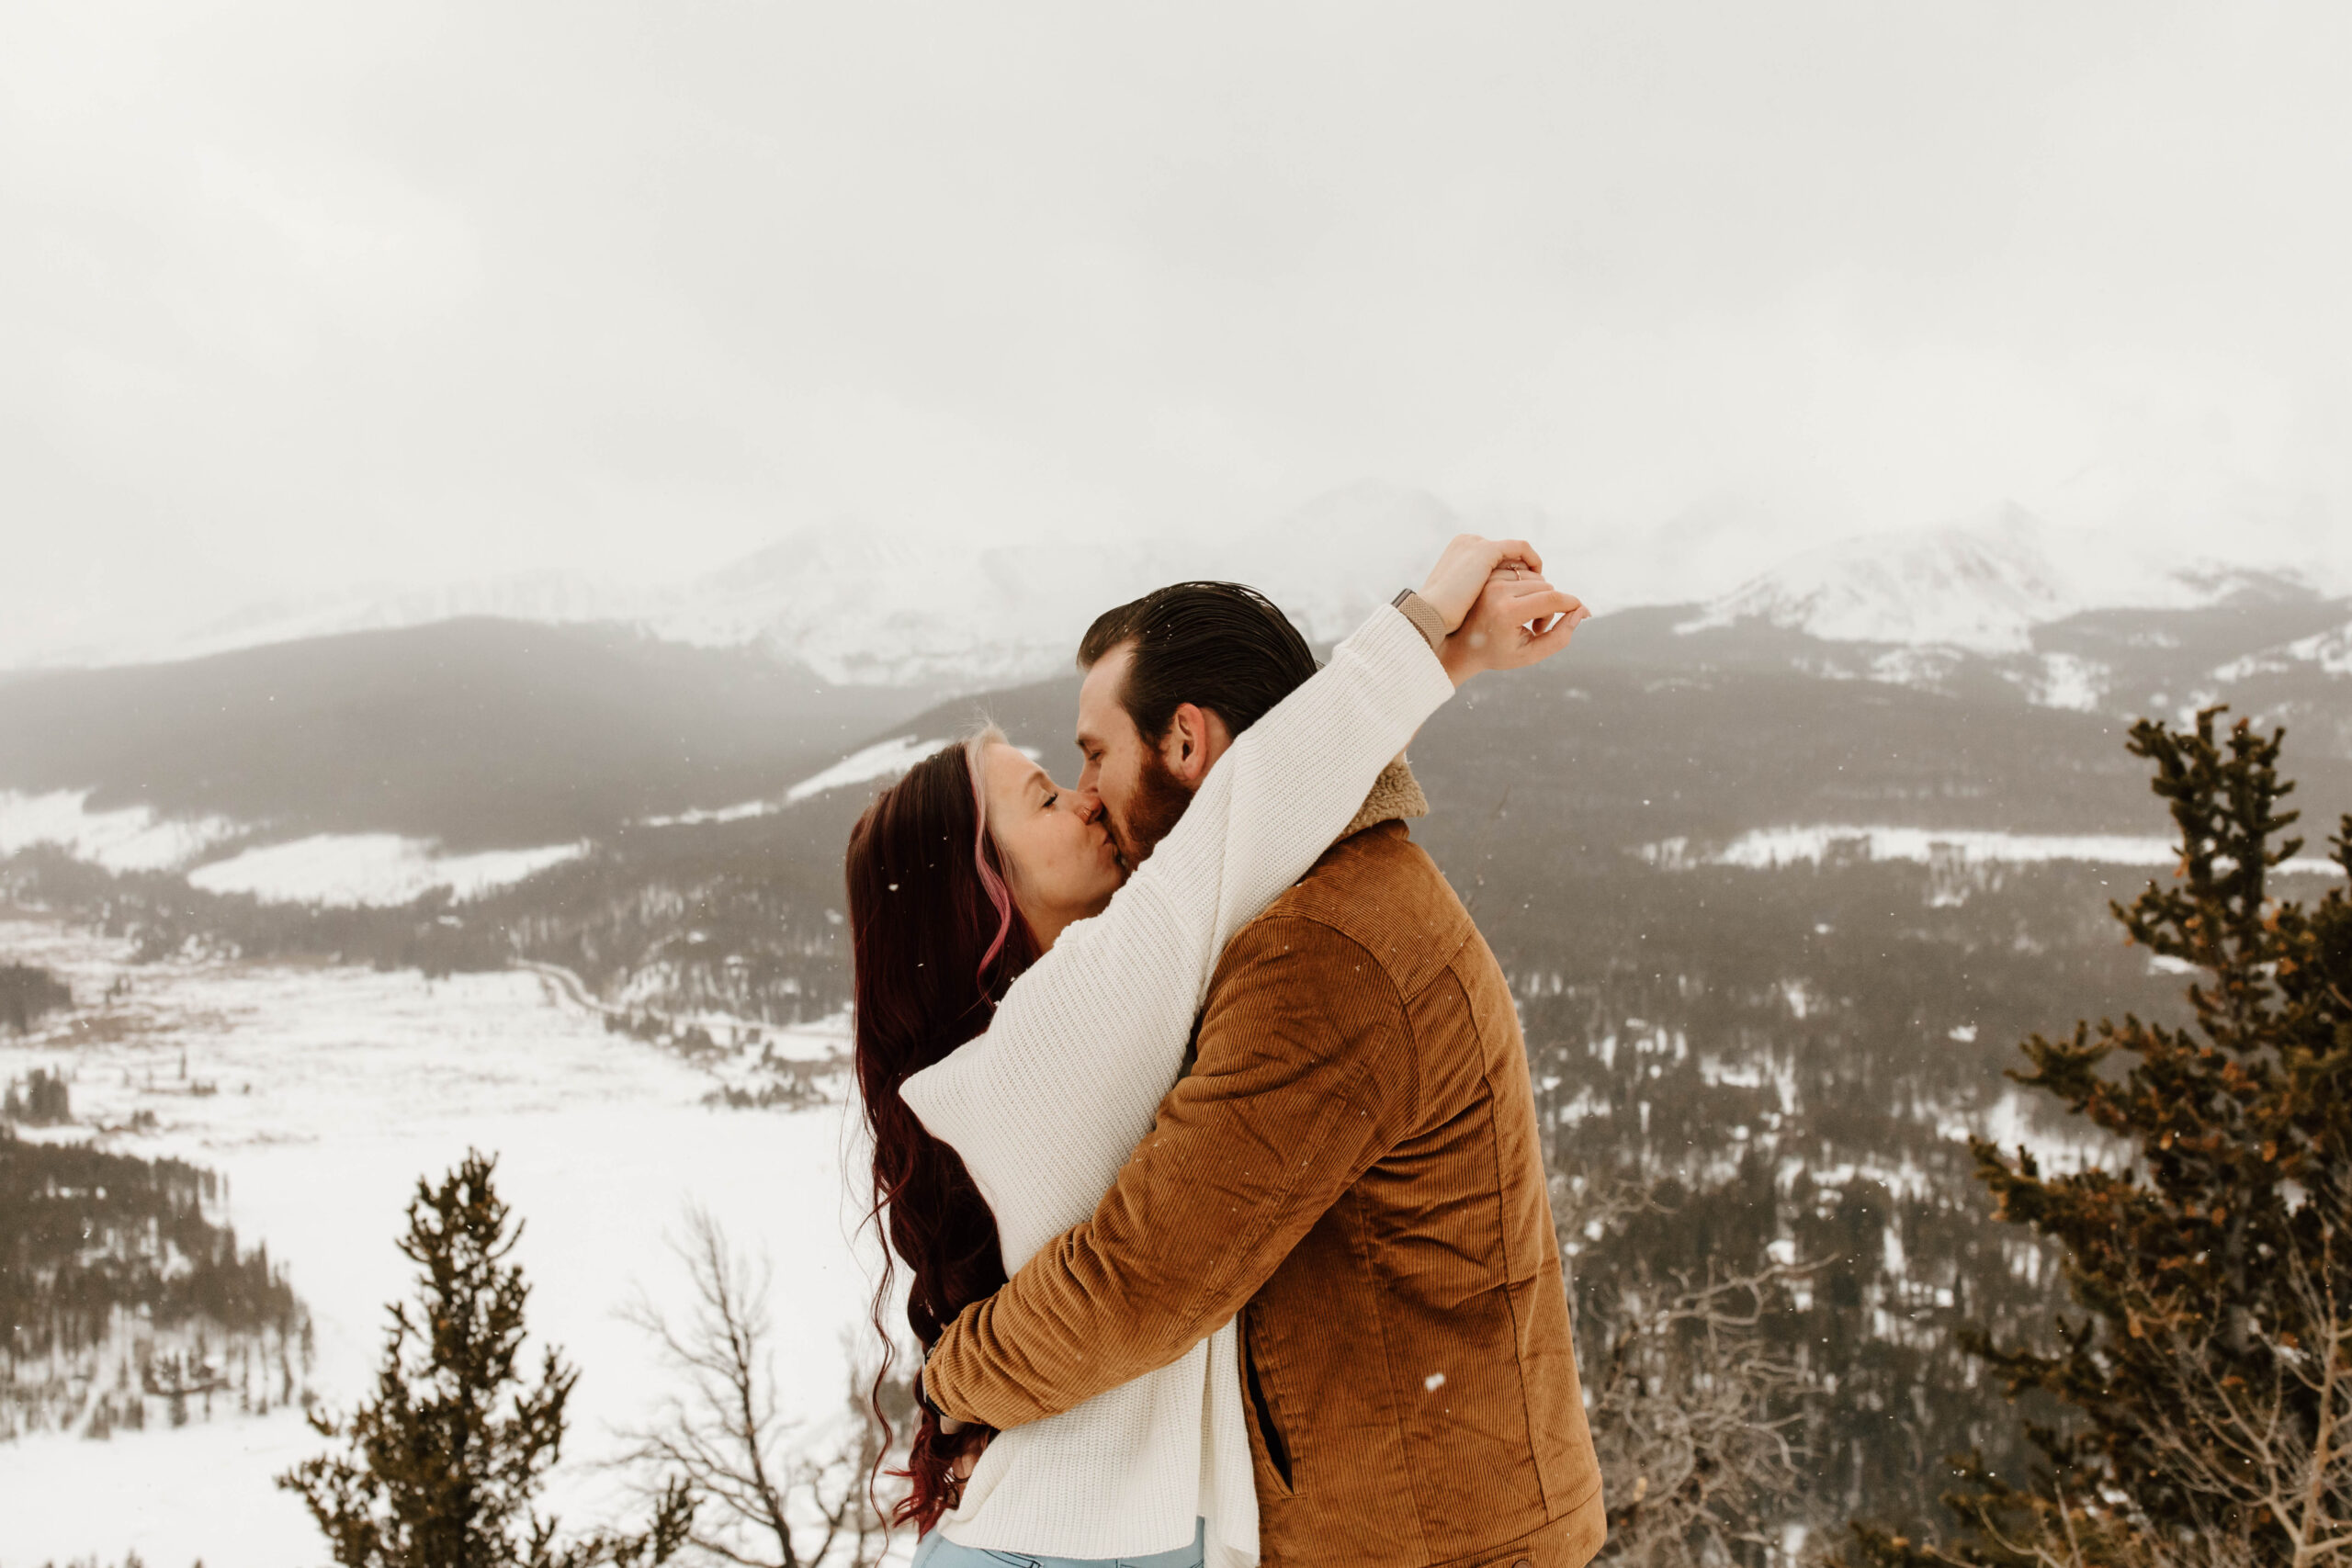 couple kisses with mountains in the background. he wears a brown jacket and she wears a white sweater